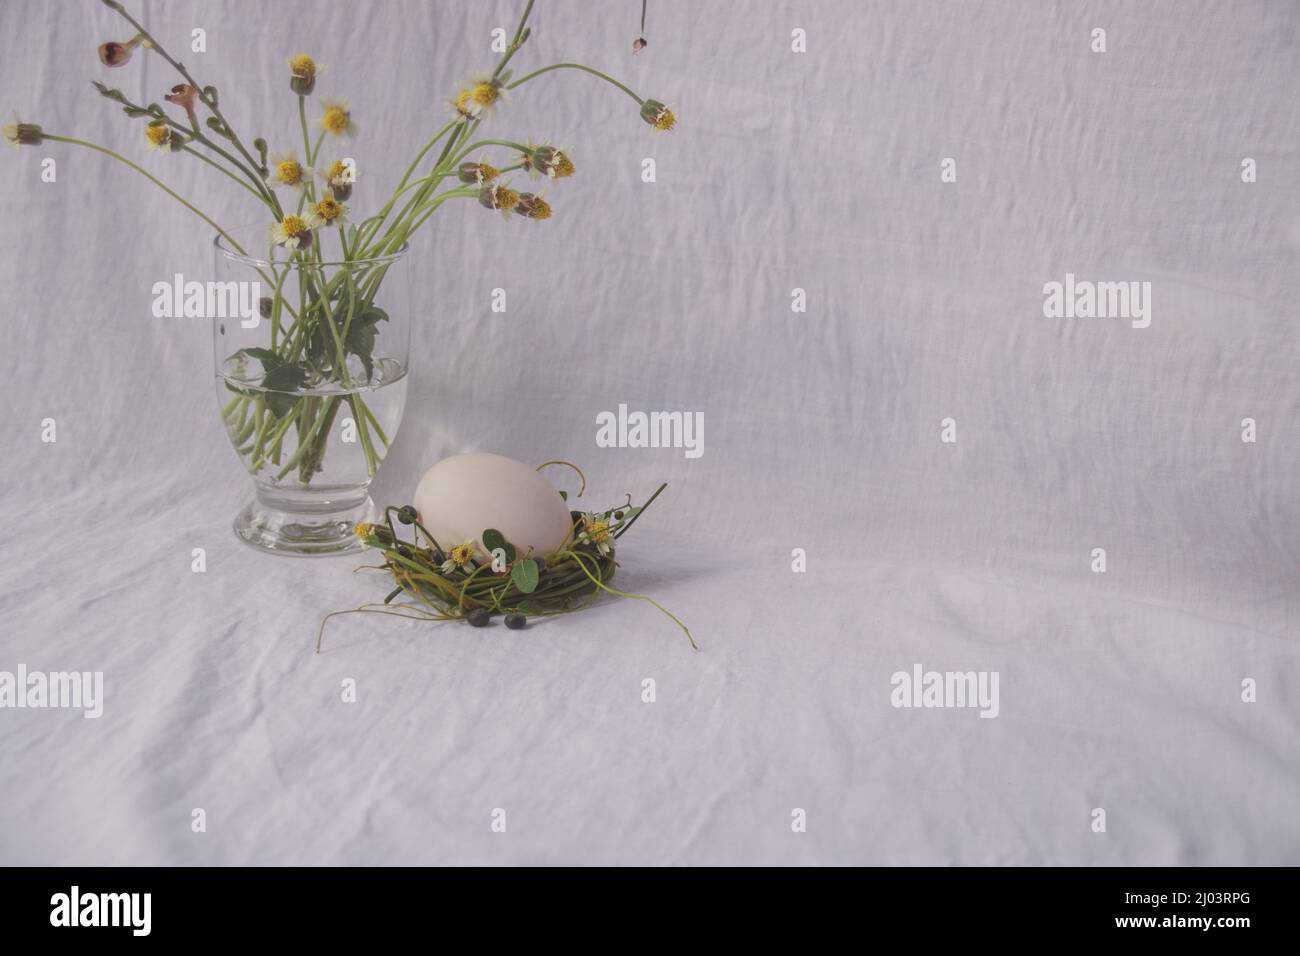 Delicate nest of flowers cradling an egg, Easter theme background Stock Photo